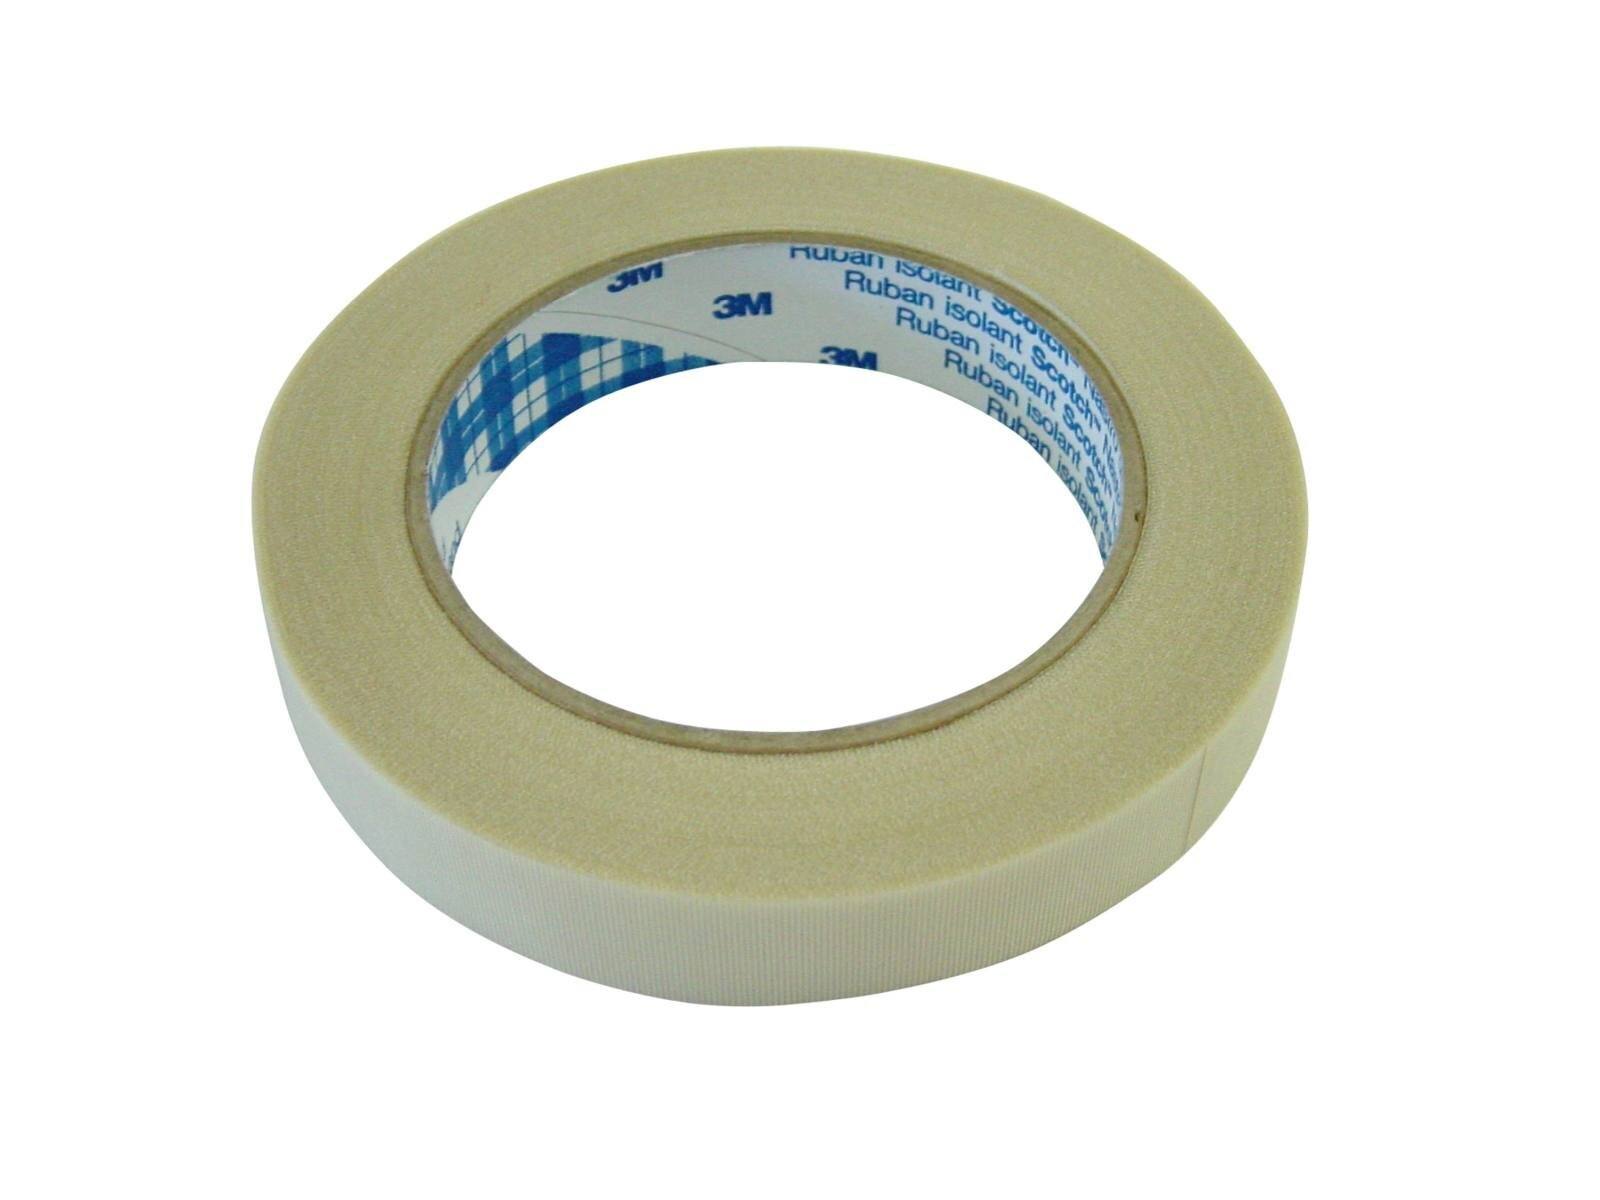 3M ET 69 Glasweefselband, wit, 12 mm x 33 m x 0,18 mm